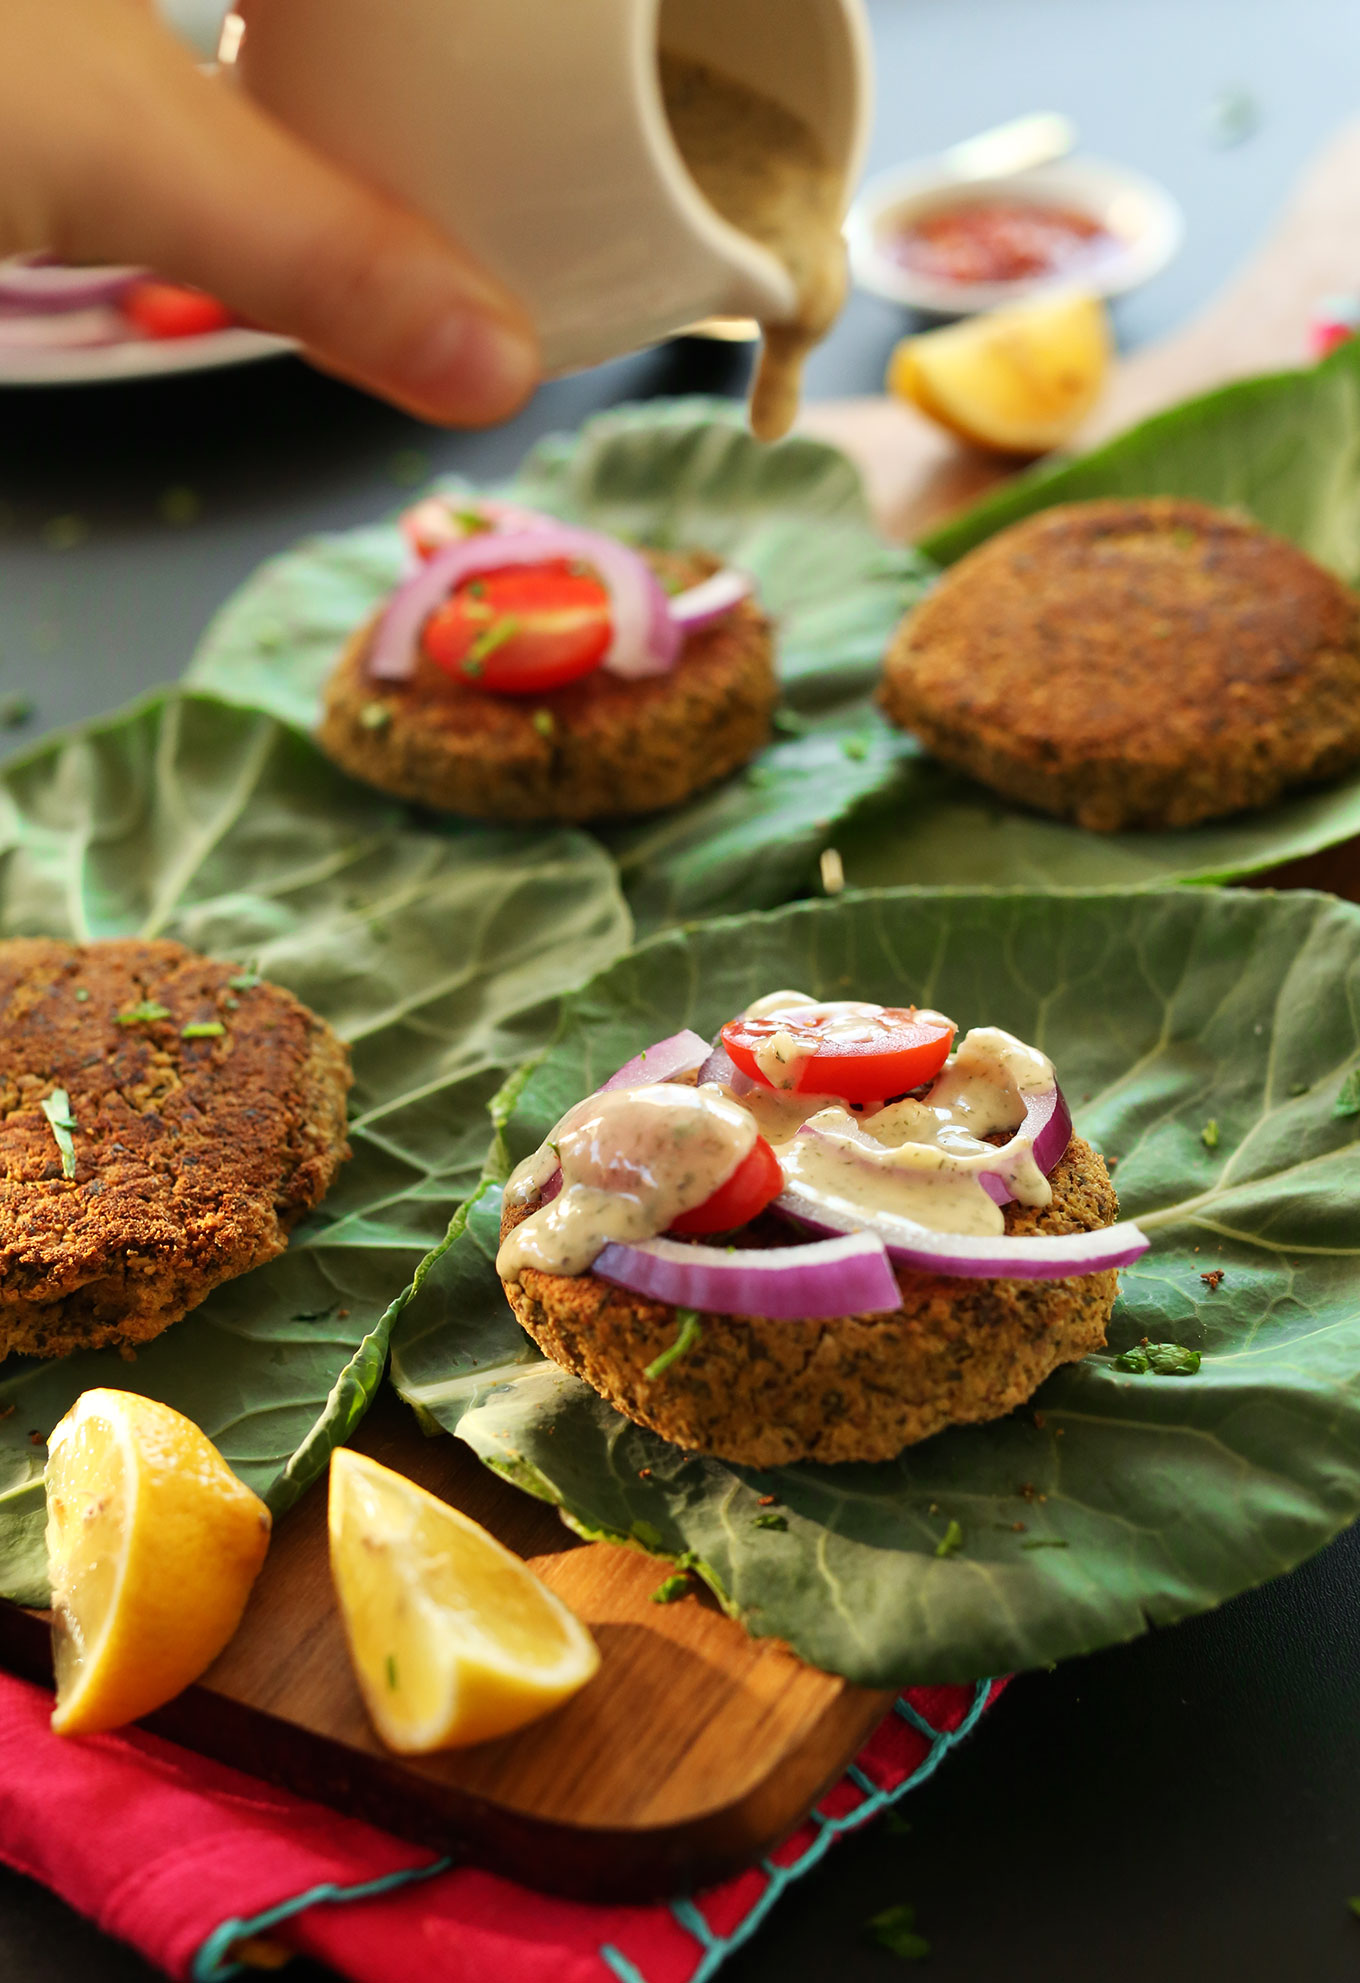 Pouring sauce over healthy baked falafel burgers